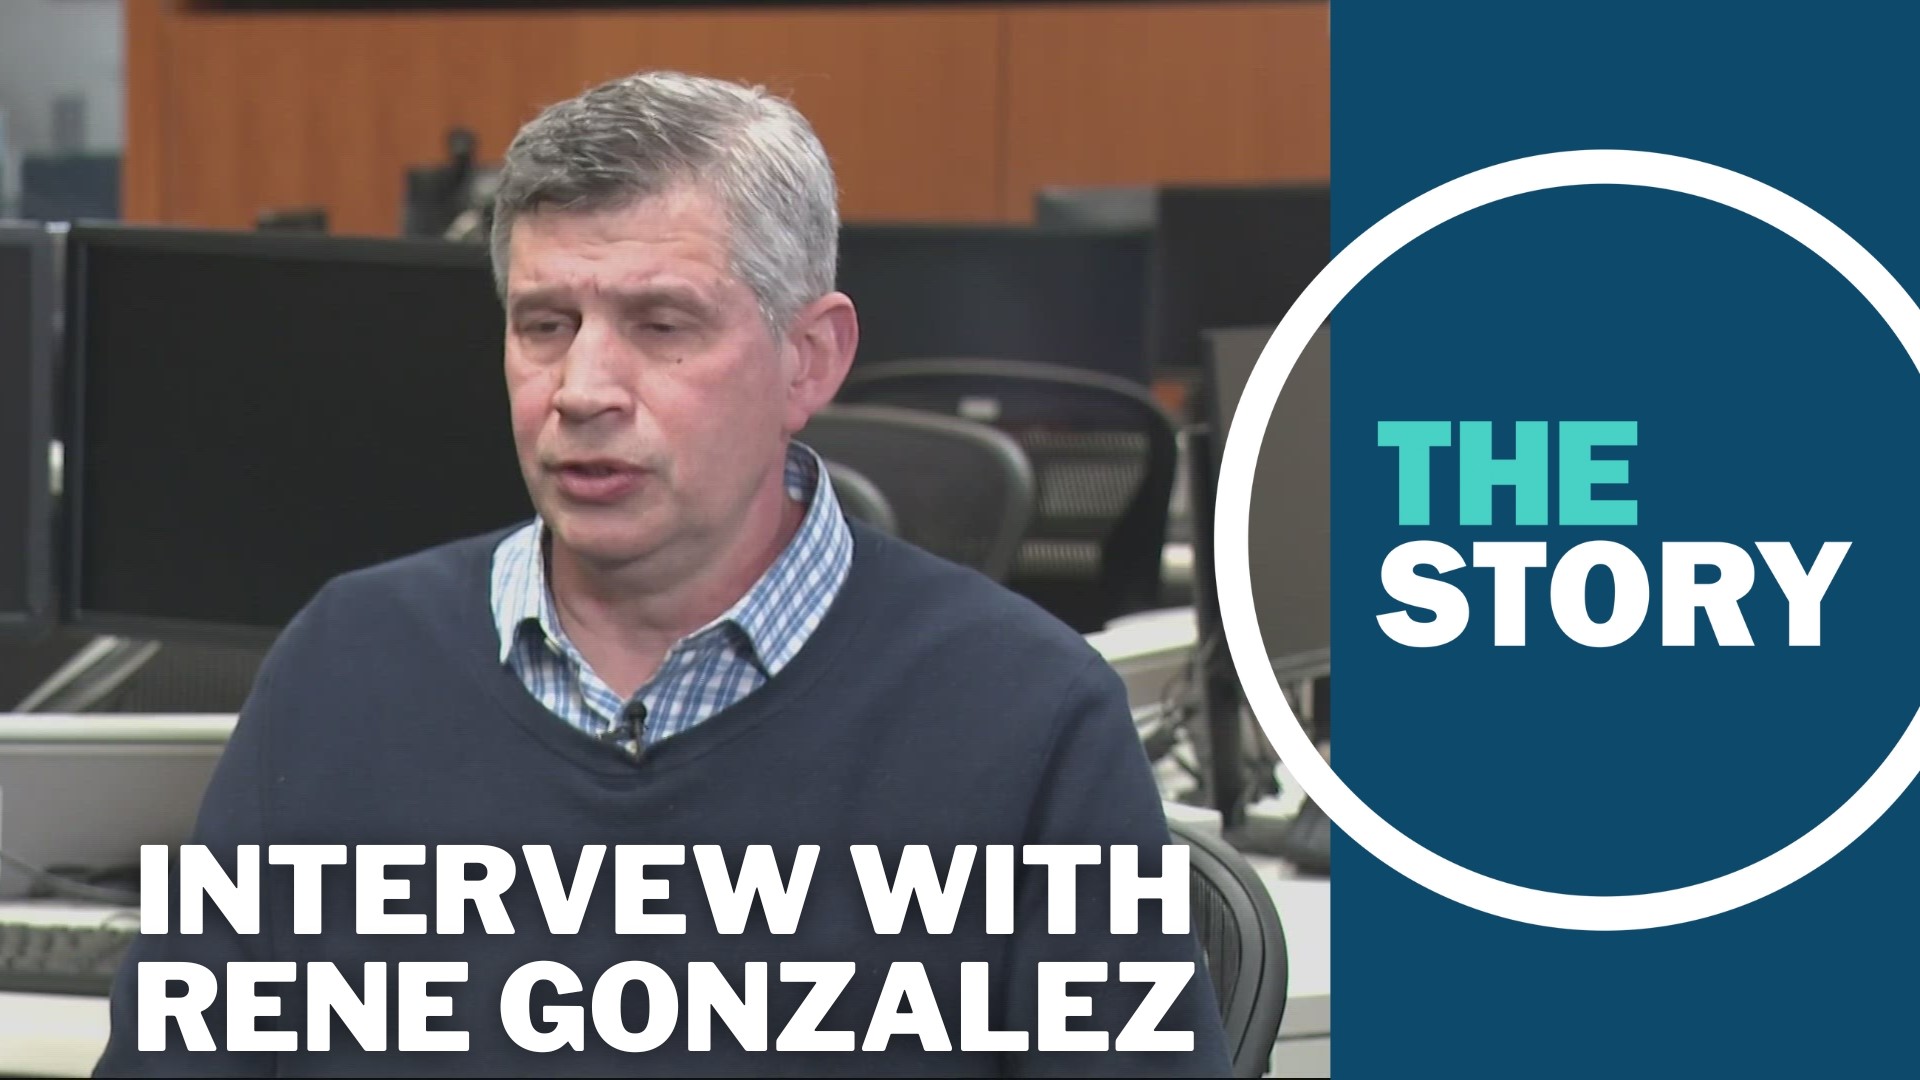 Gonzalez leads the city’s Fire Bureau. But his biggest moves so far have been on Portland Street Response and how they interact with the homeless.